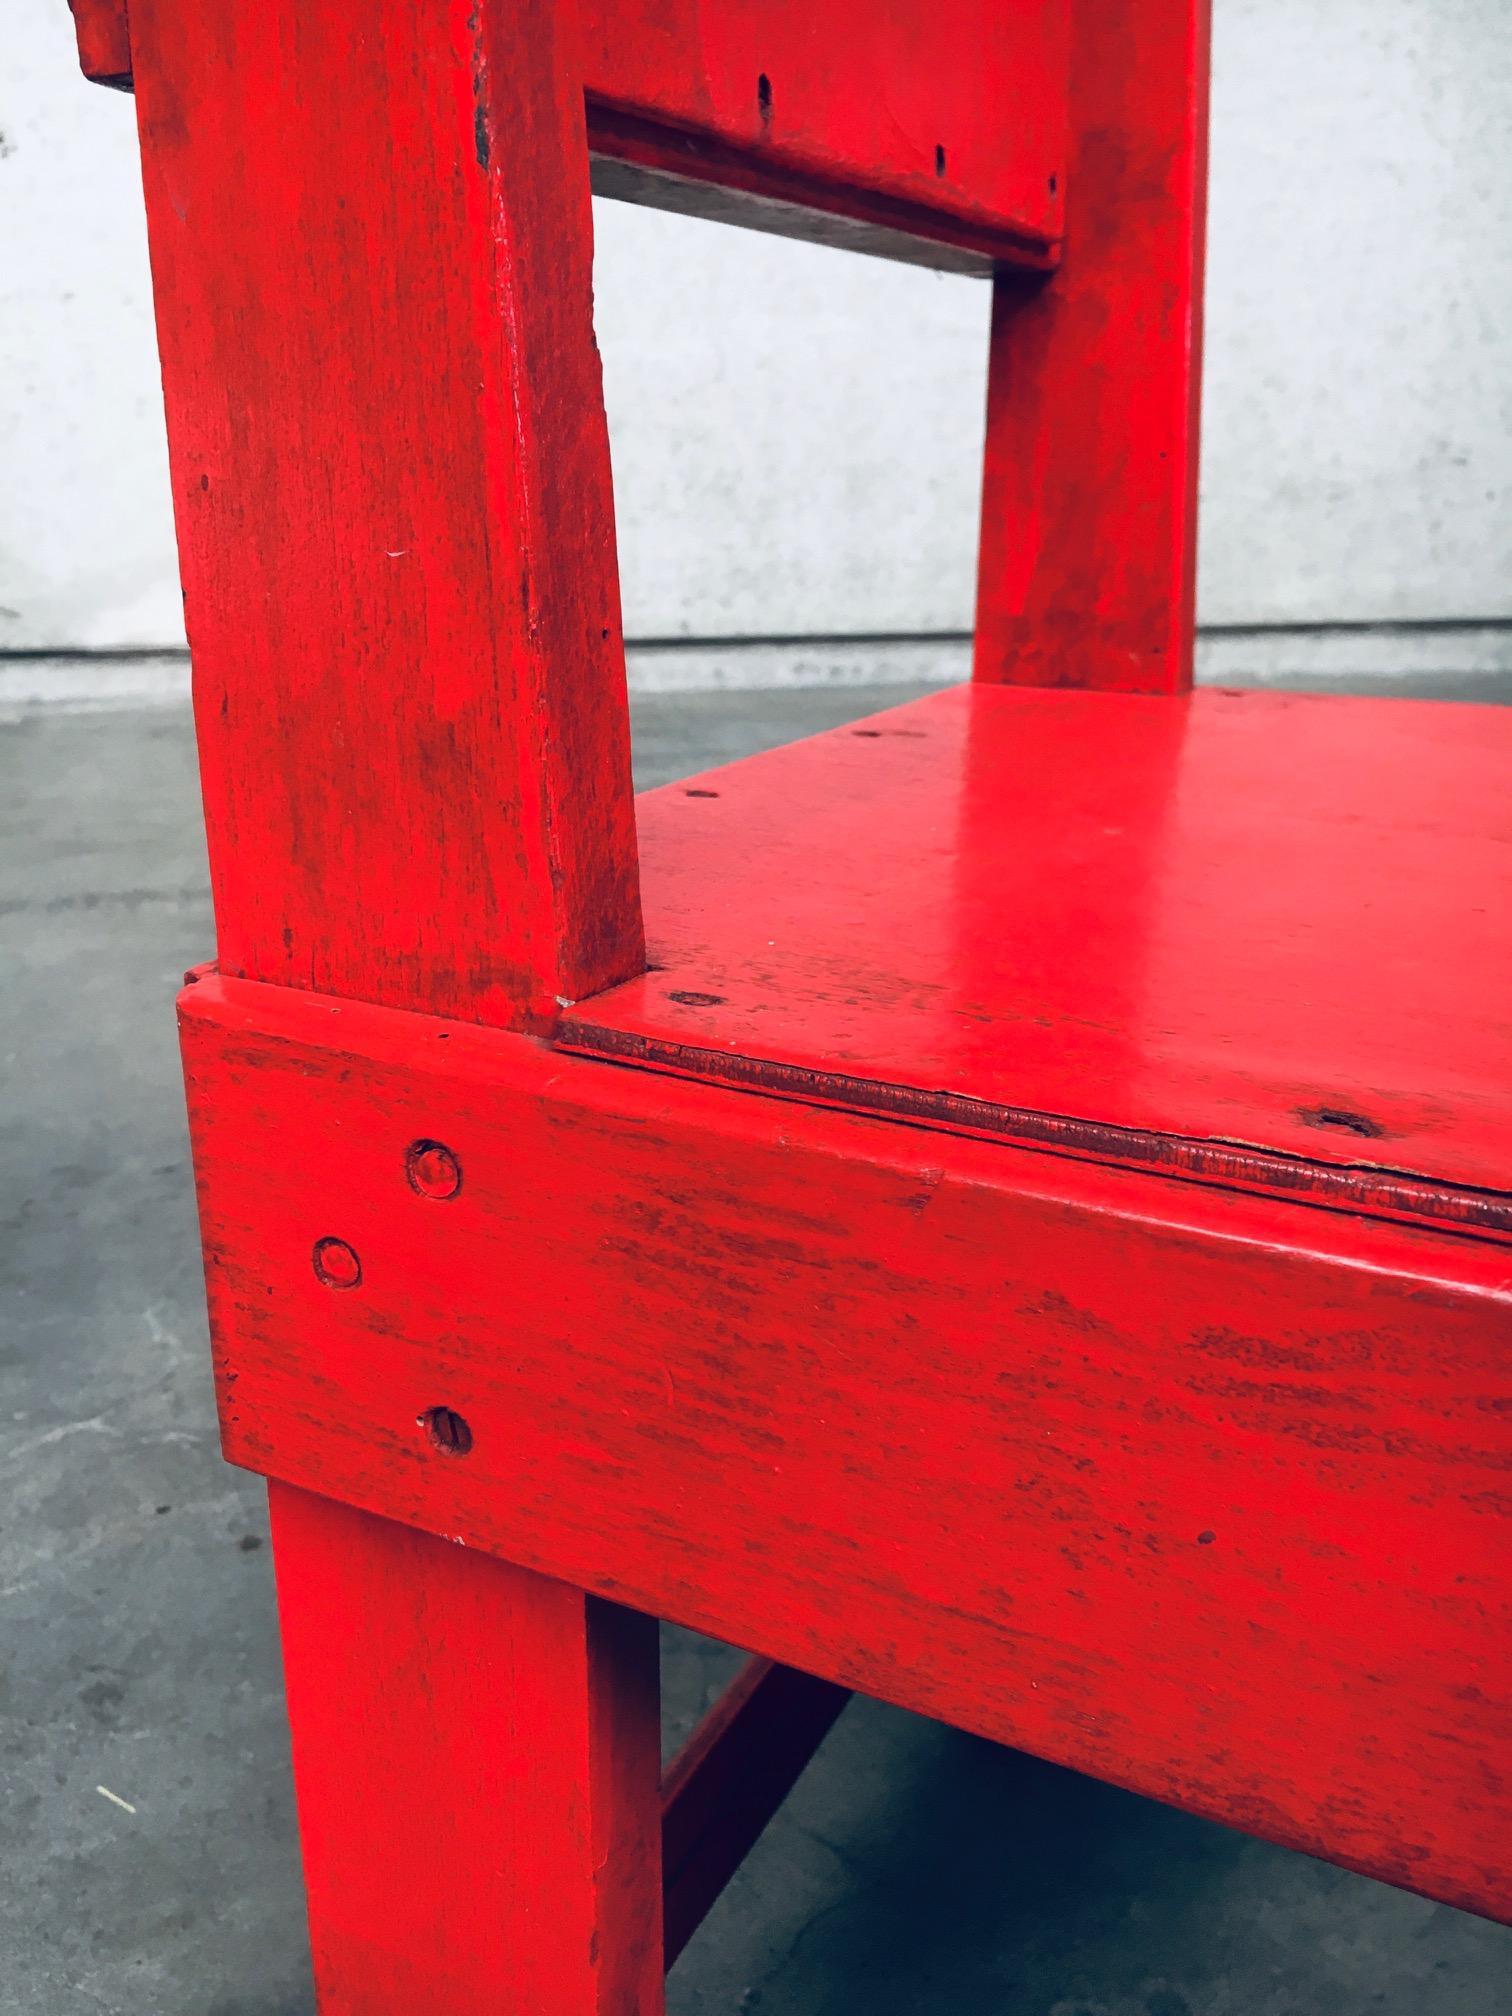 De Stijl Movement Design Red Chair Attributed to Jan Wils, 1920's Netherlands For Sale 8